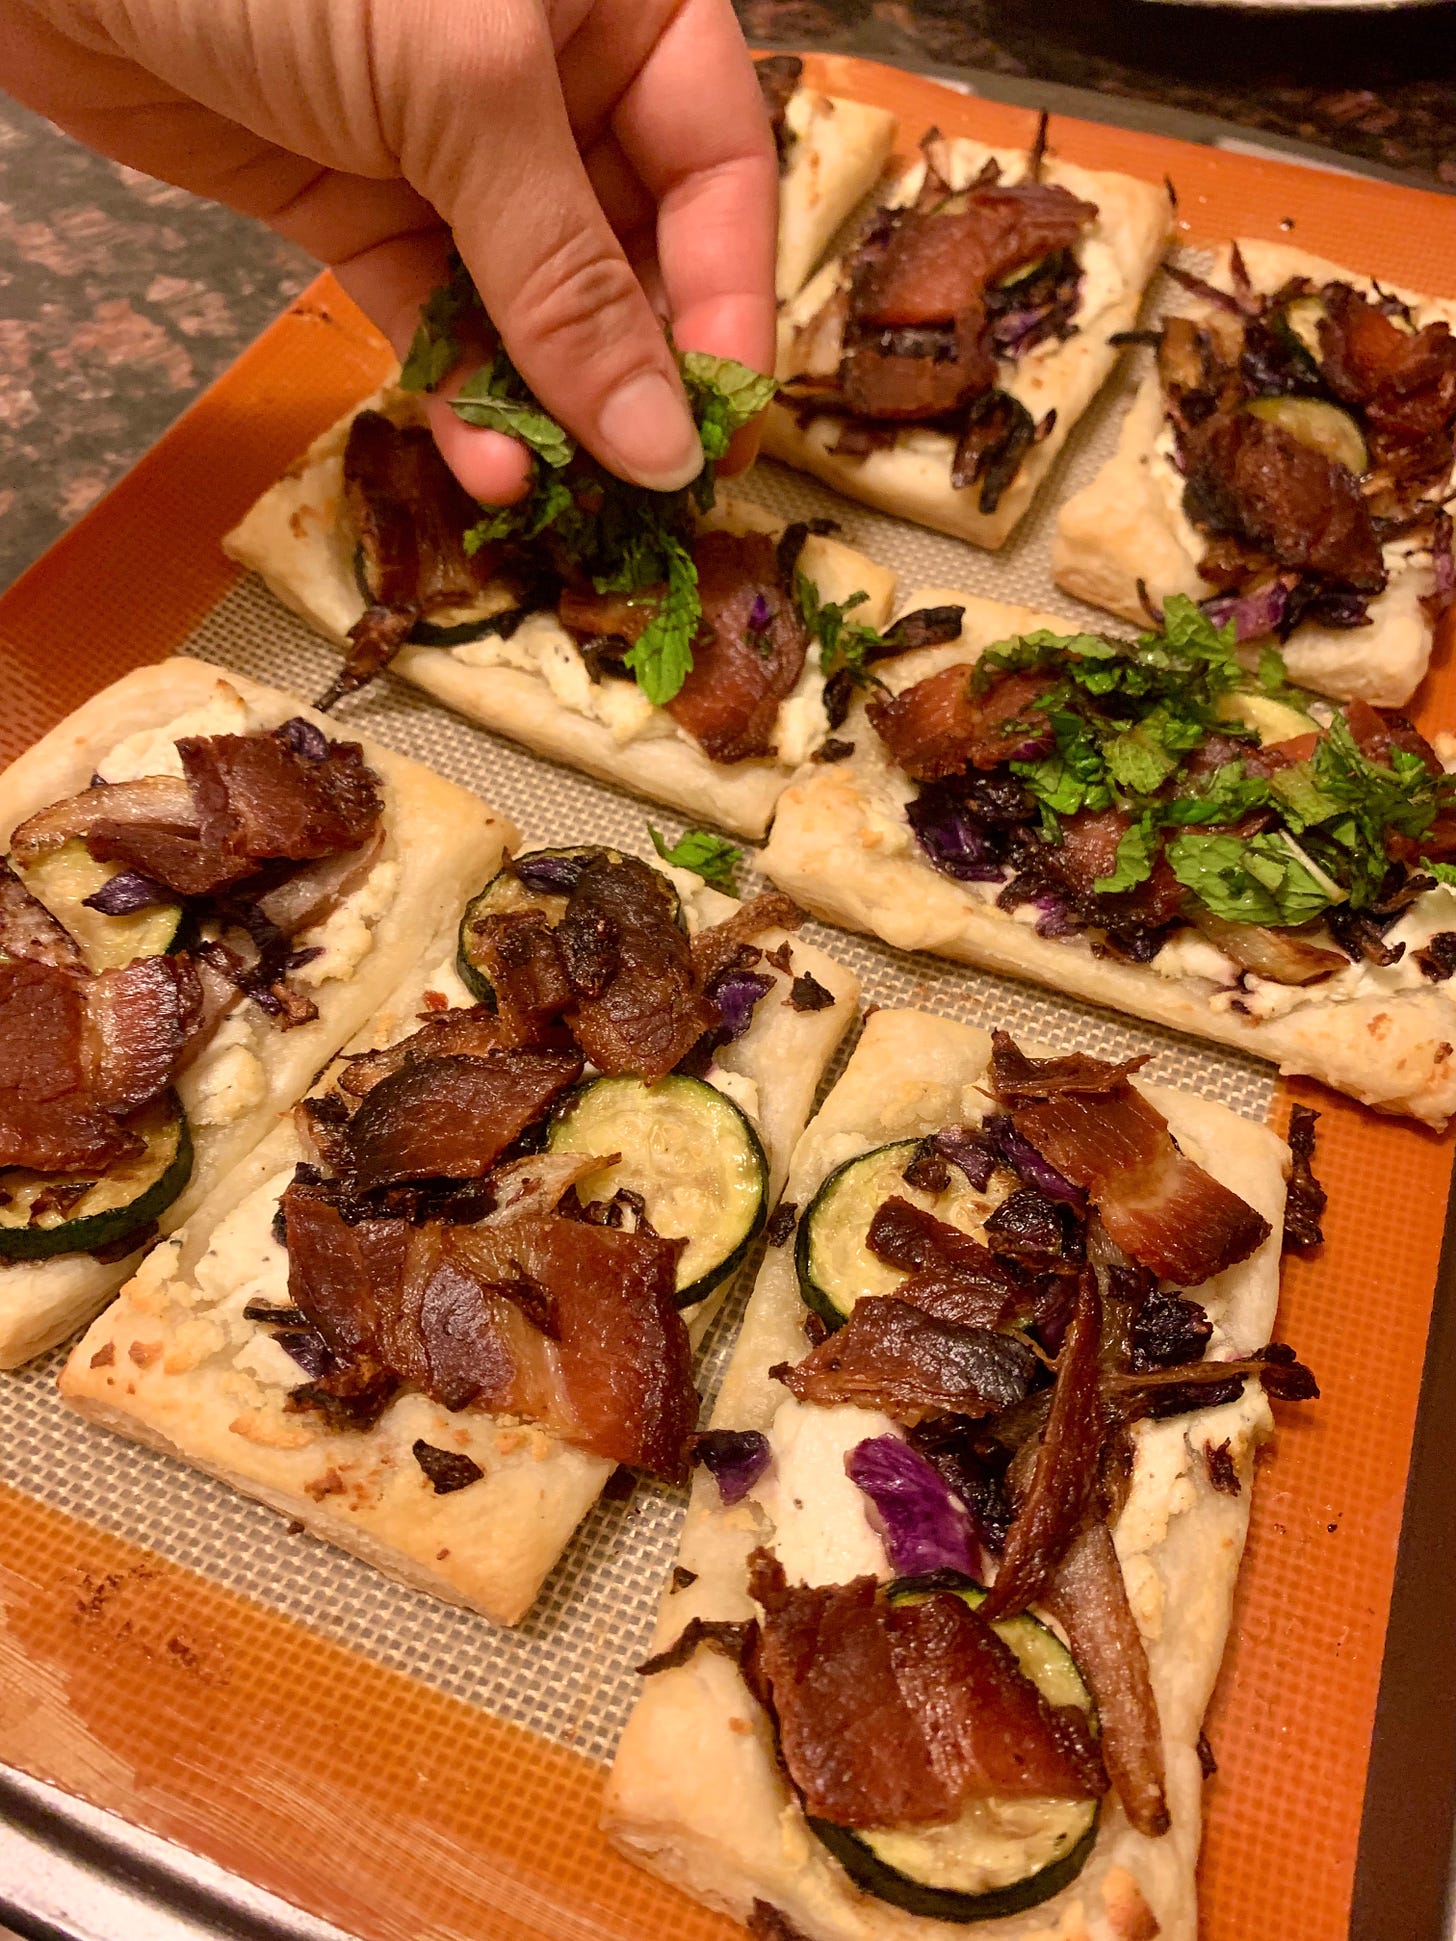 Top view of hand holding mint as it is sprinkled on slices of puff pastry topped with vegetables and bacon